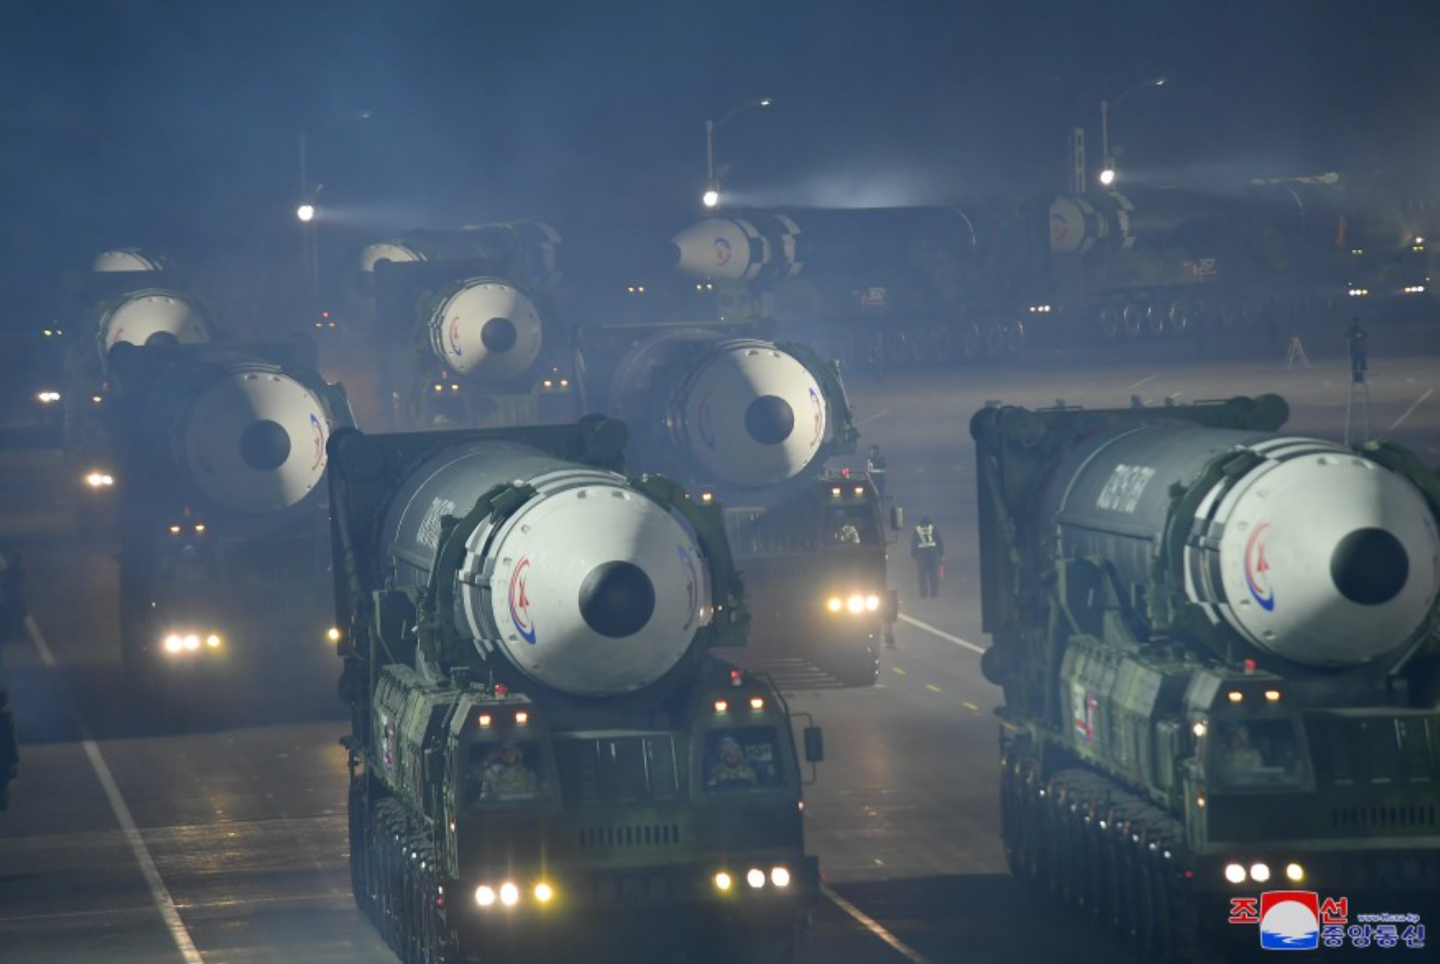 Multiple examples of the Hwasong-17 ICBM roll through Pyongyang. At least 10 are visible here. <em>KCNA</em>